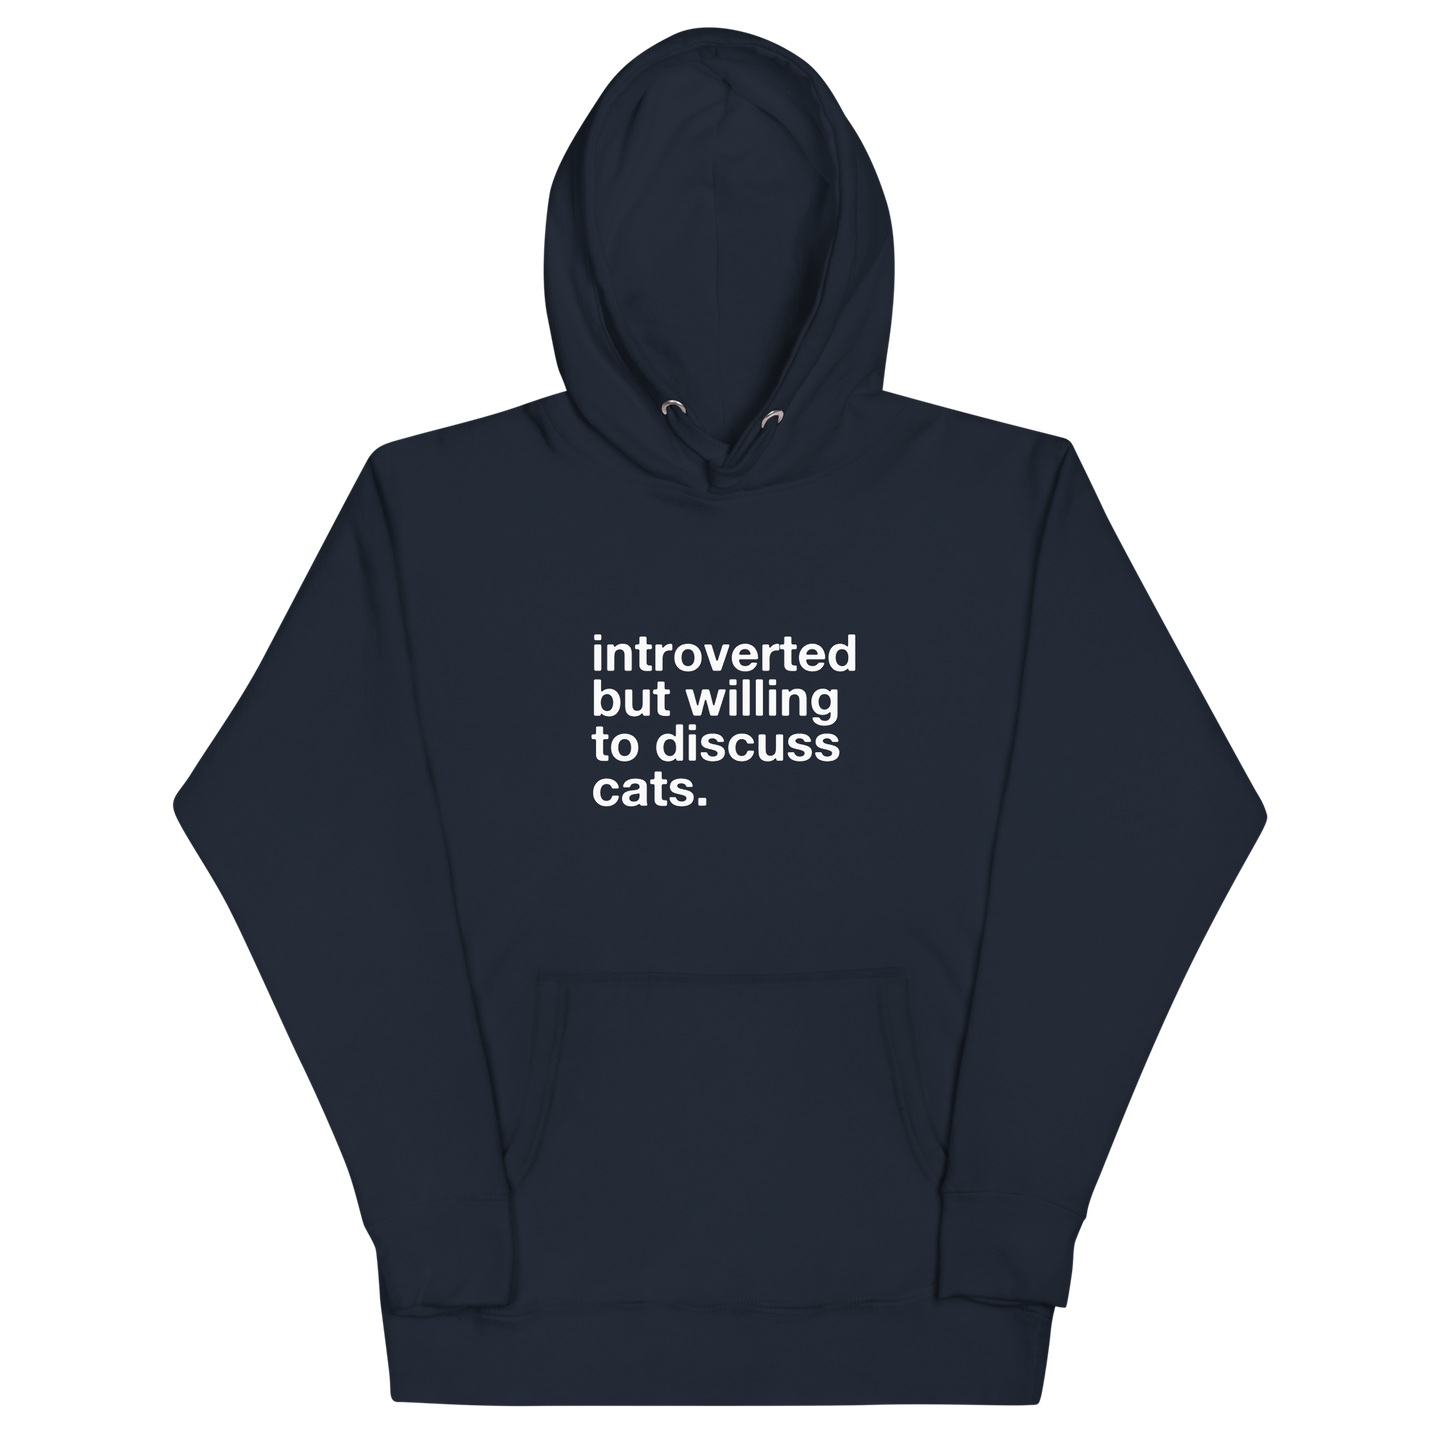 introverted but willing to discuss cats. - Unisex Premium Hoodie